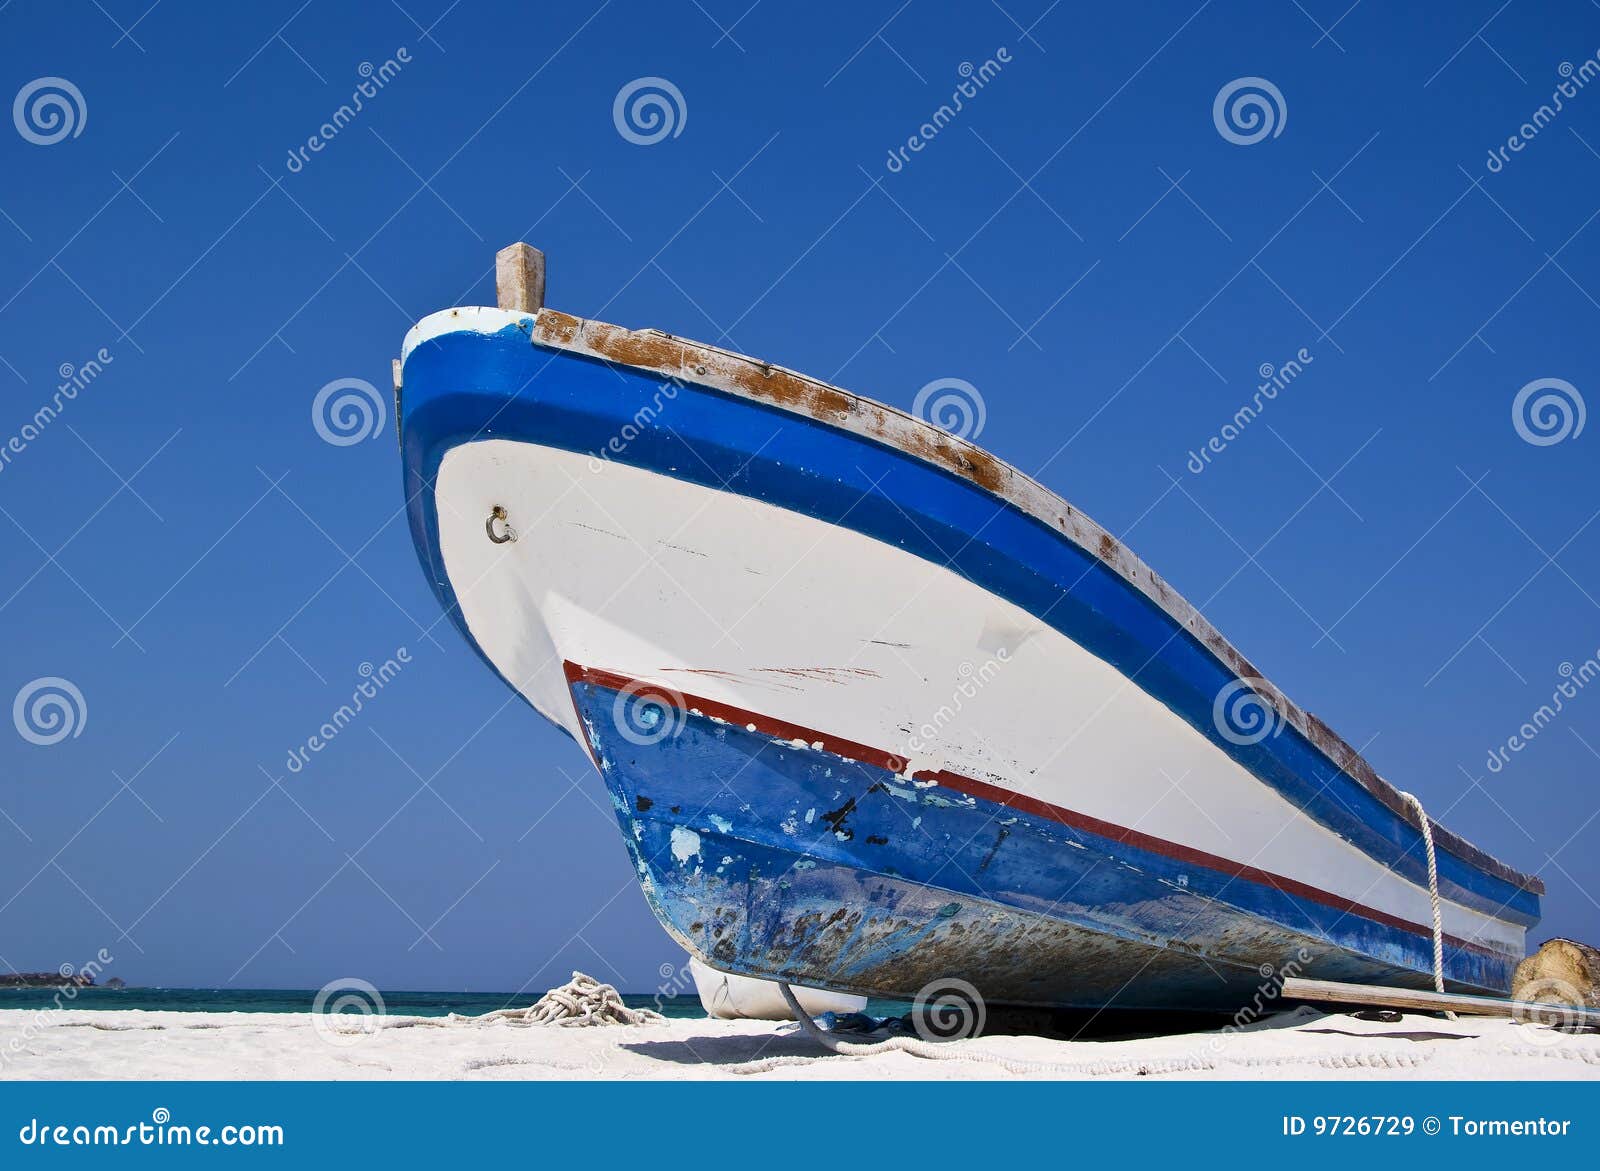 Old Fishing Boat On A Caribbean Beach. Stock Image - Image ...